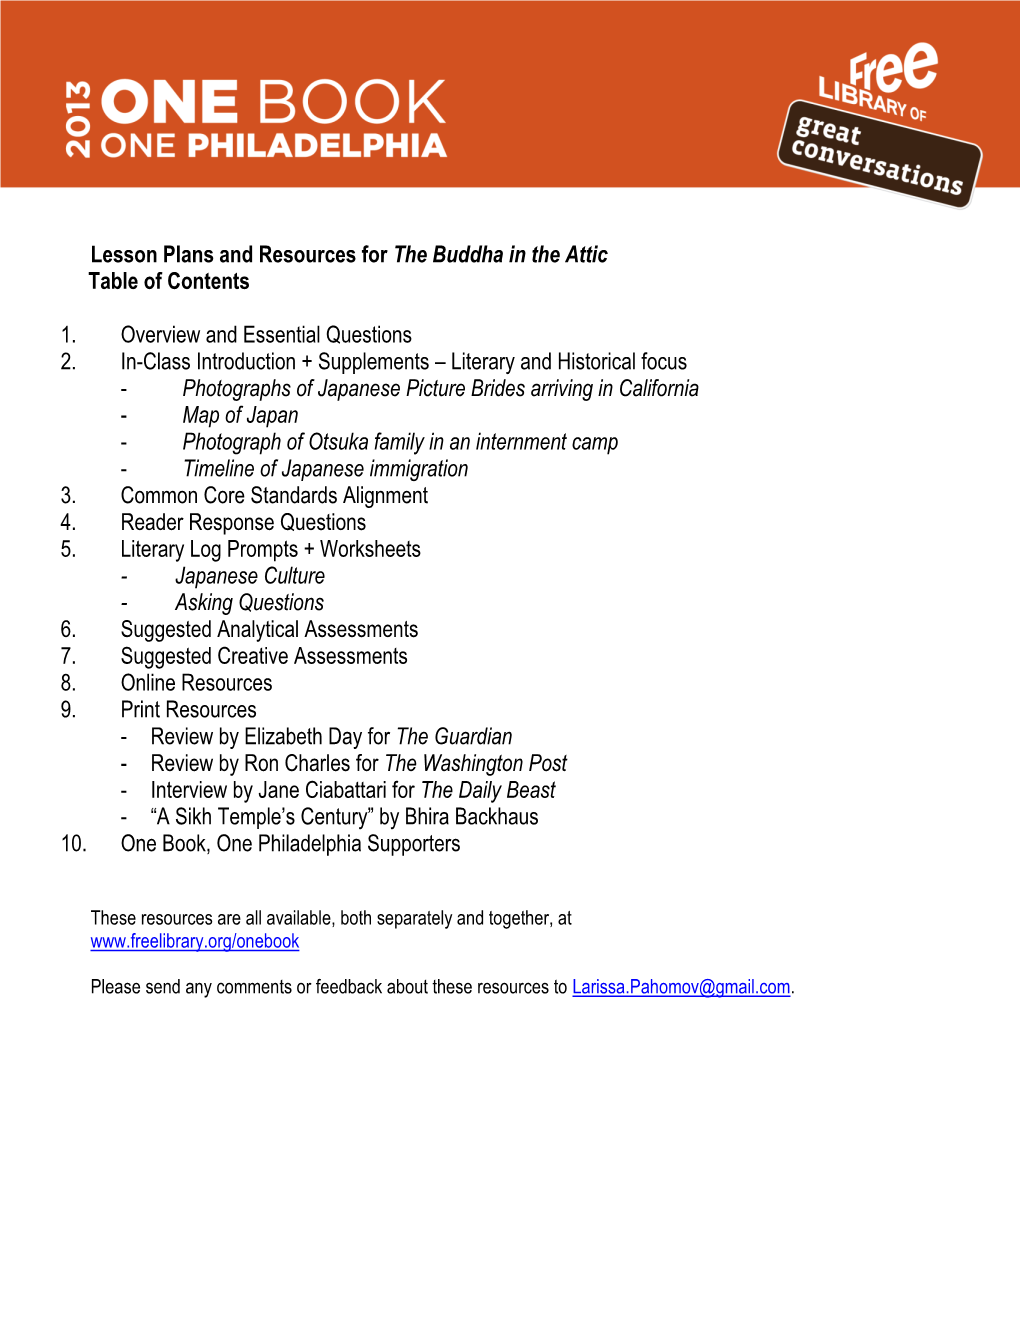 Lesson Plans and Resources for the Buddha in the Attic Table of Contents